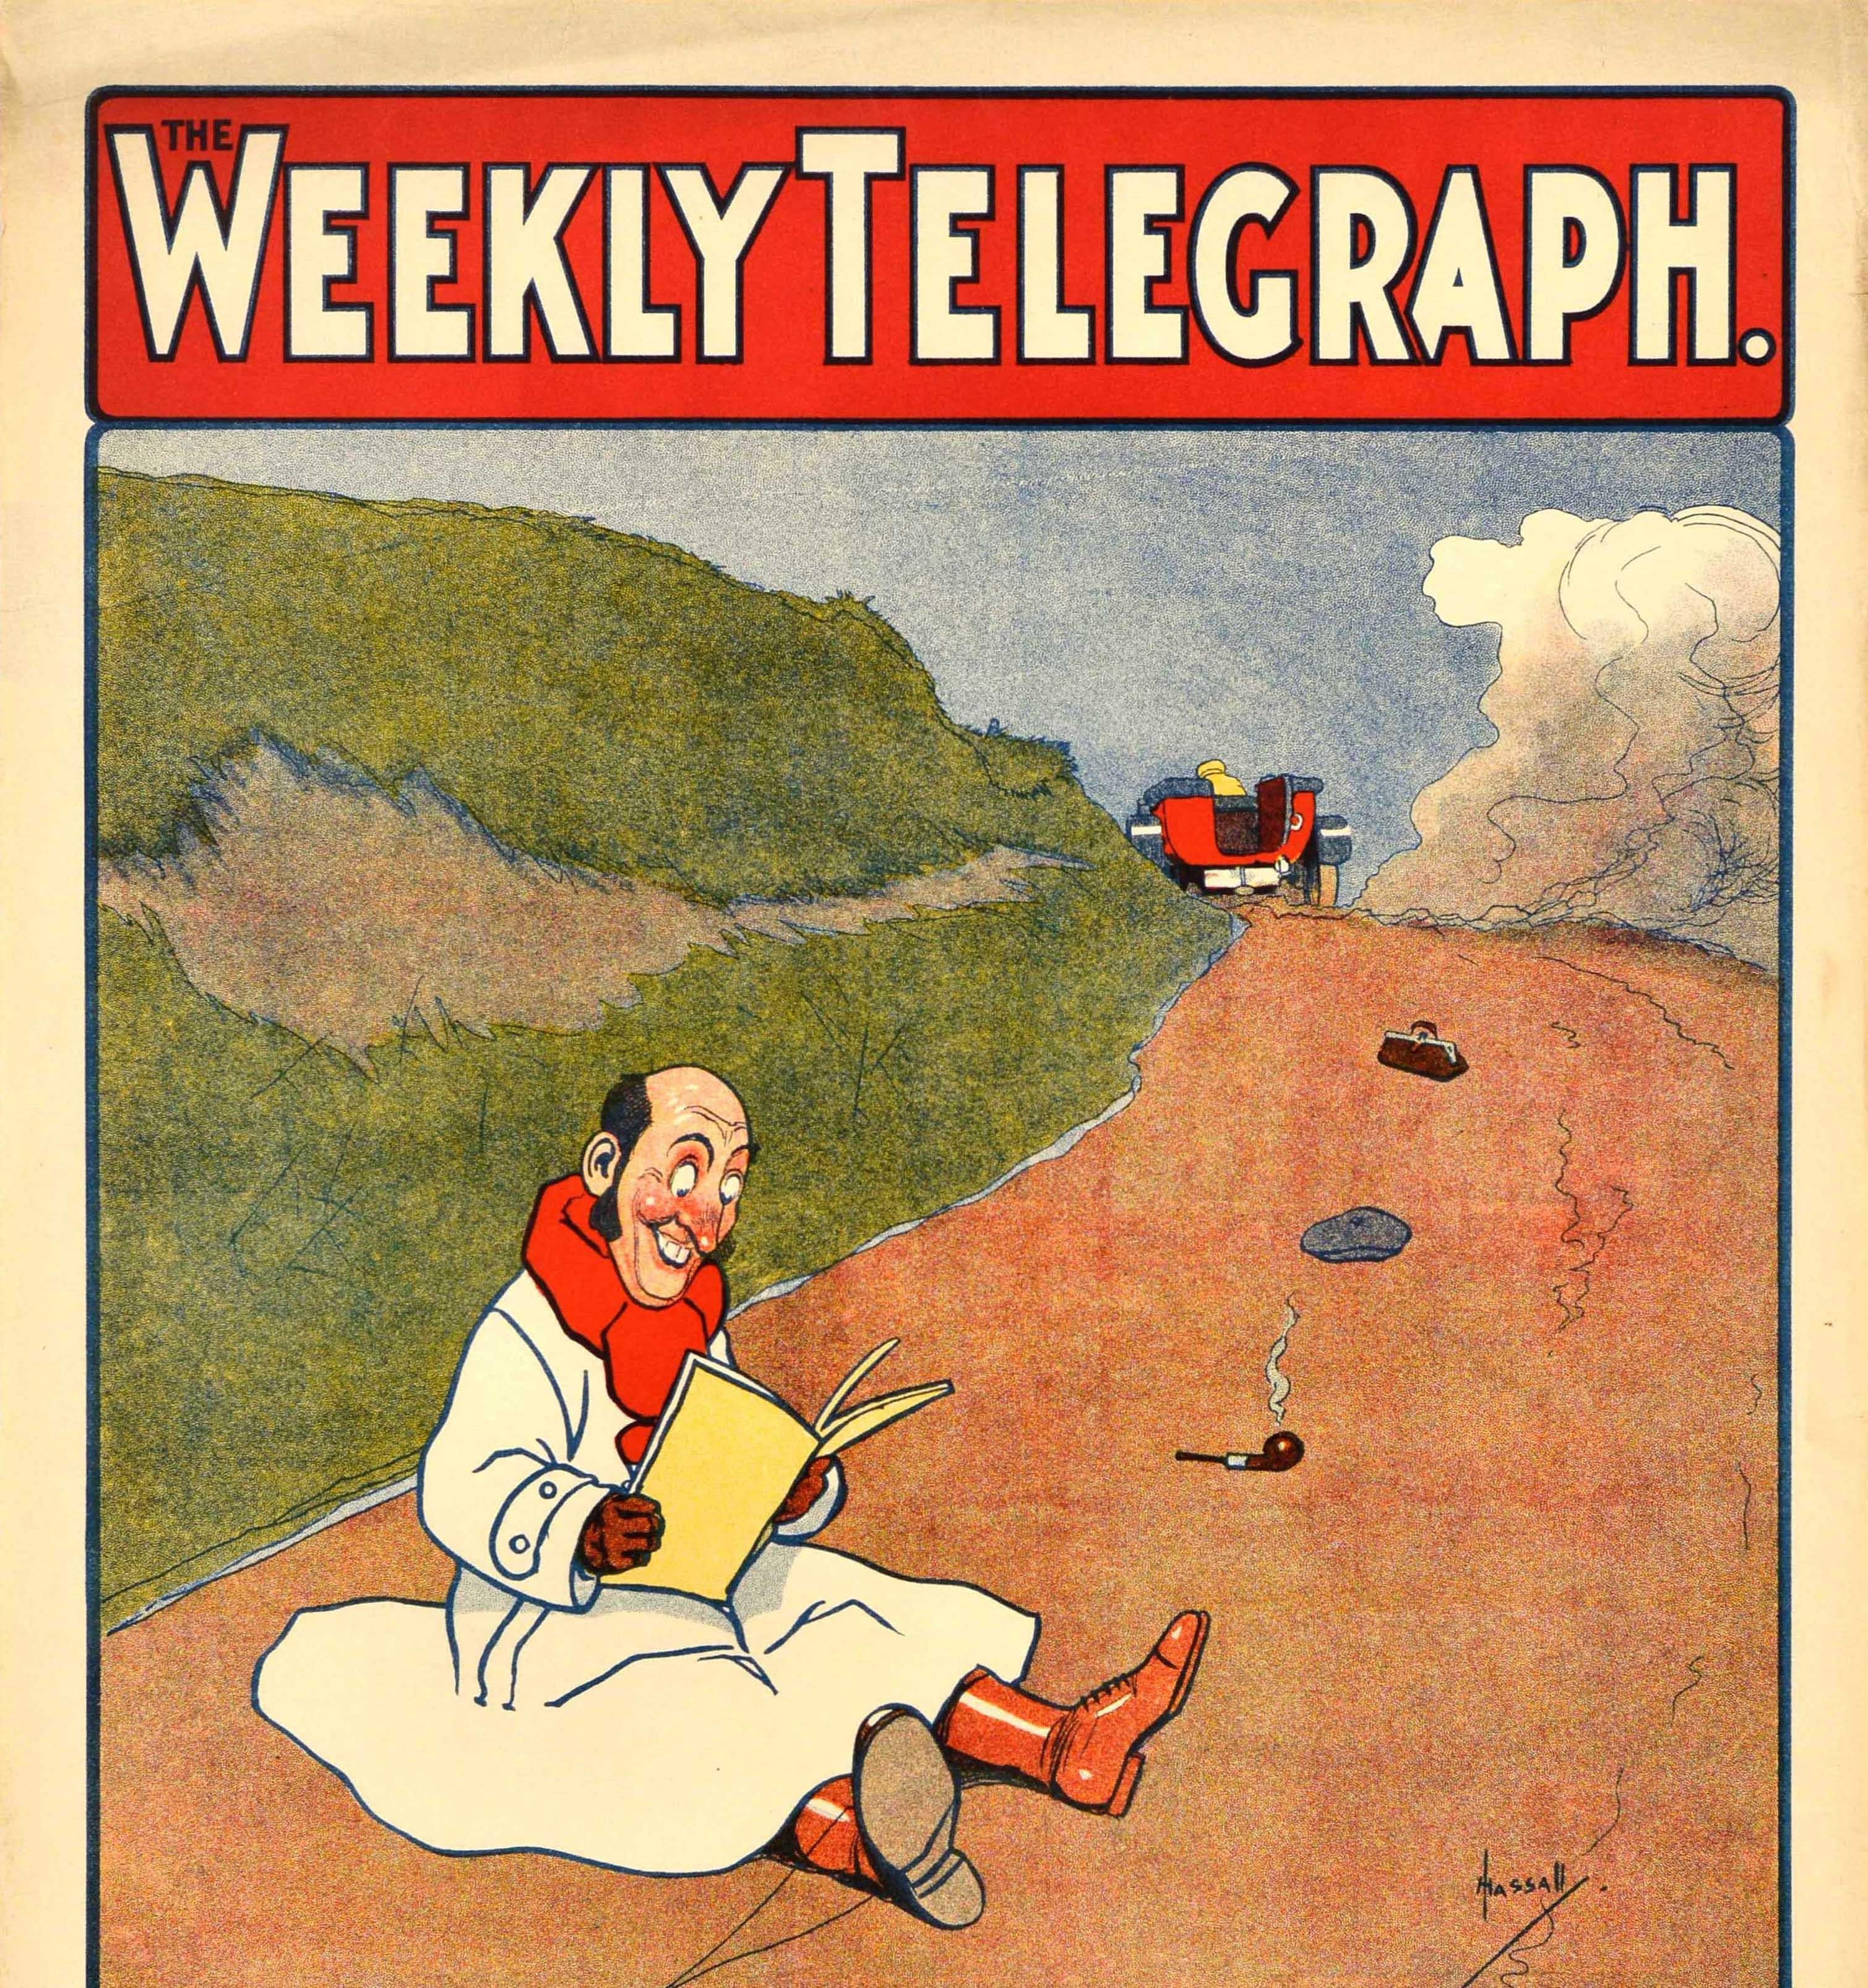 British Original Antique Newspaper Advertising Poster The Weekly Telegraph On The Road For Sale